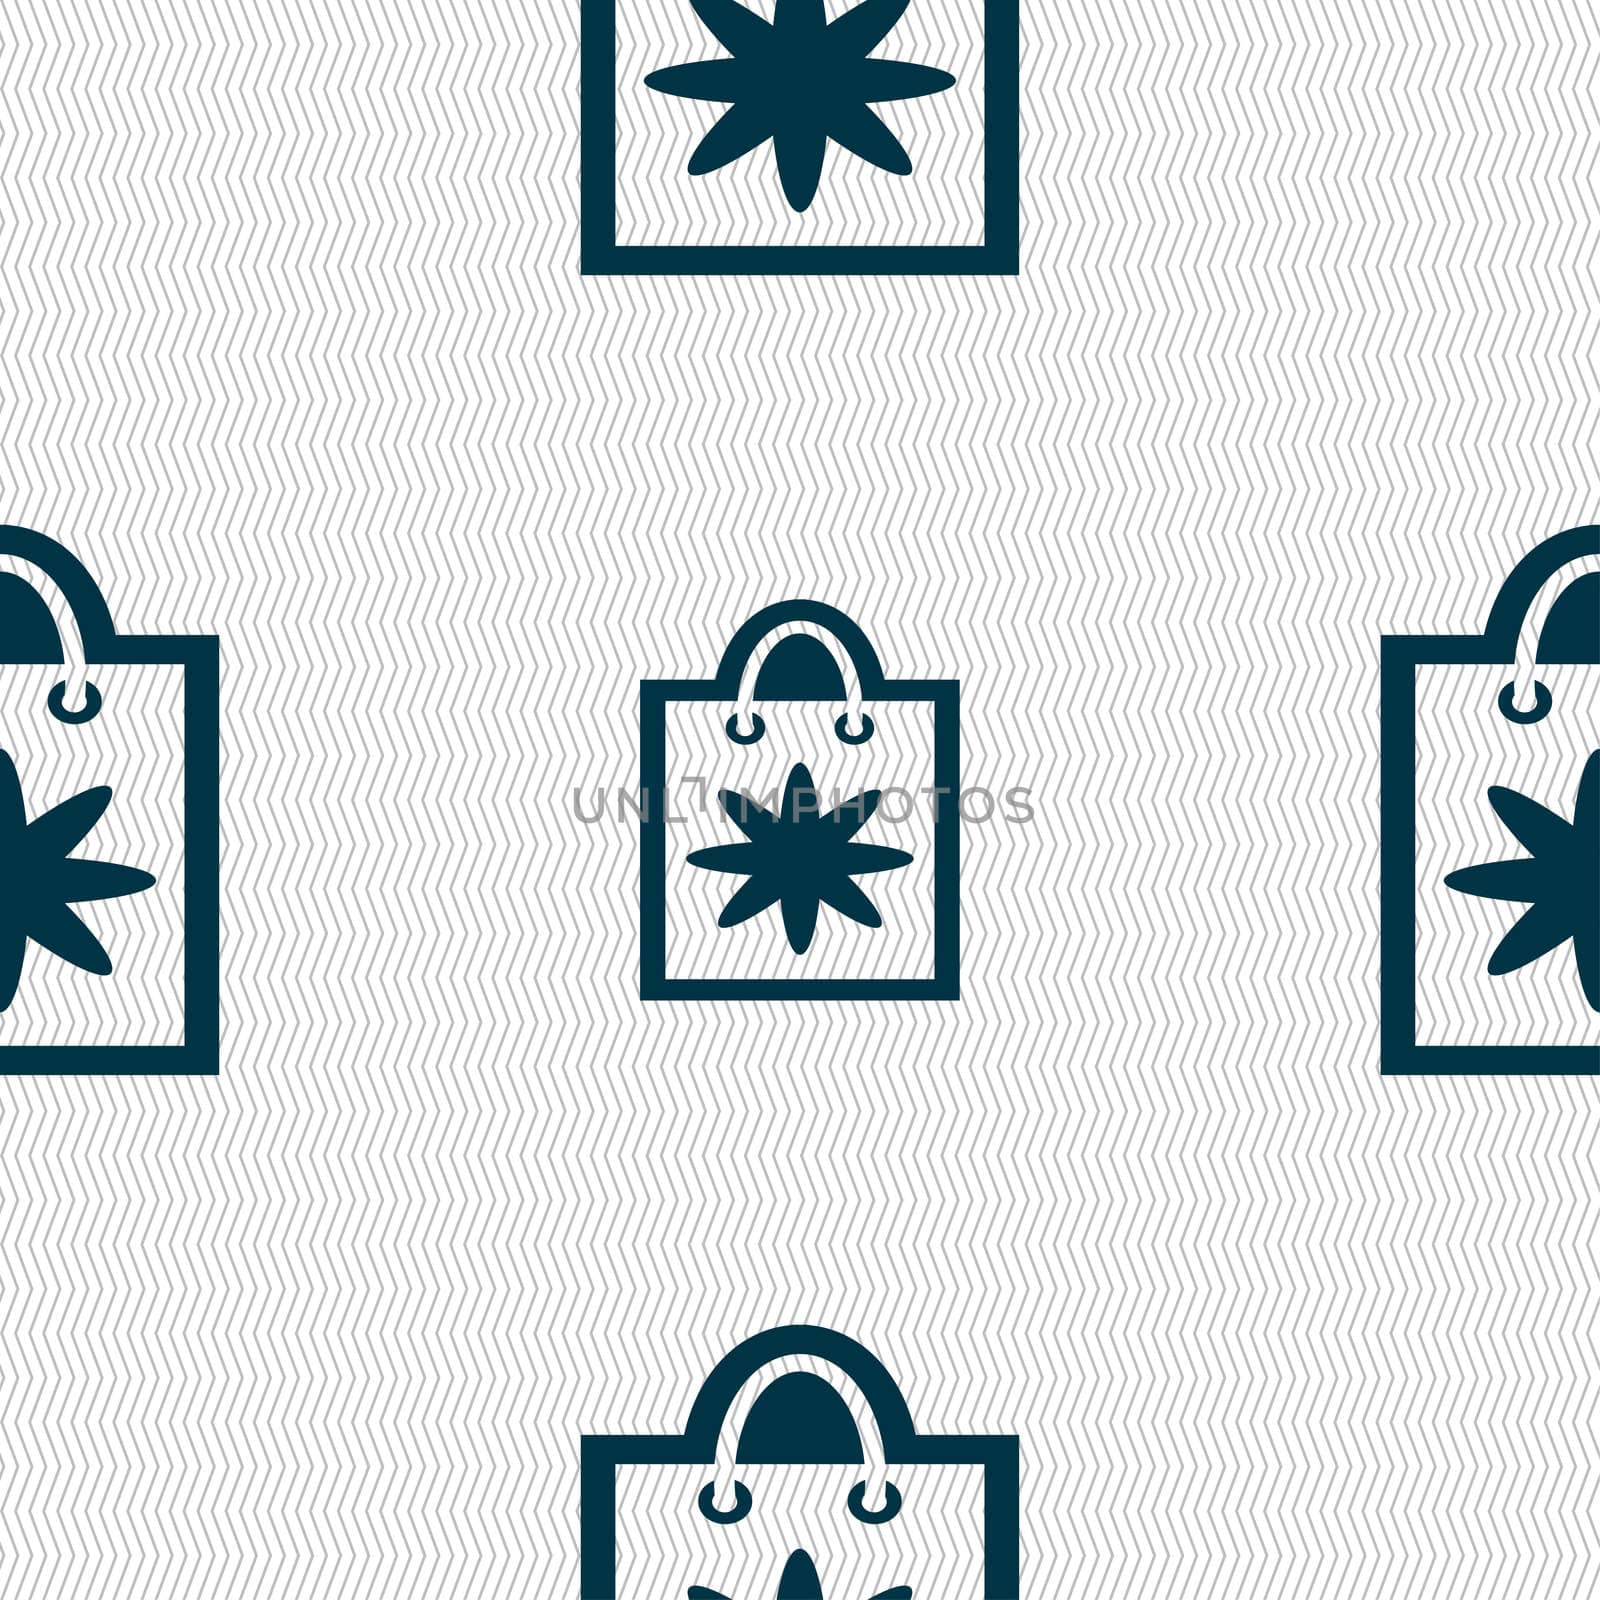 shopping bag icon sign. Seamless pattern with geometric texture. illustration